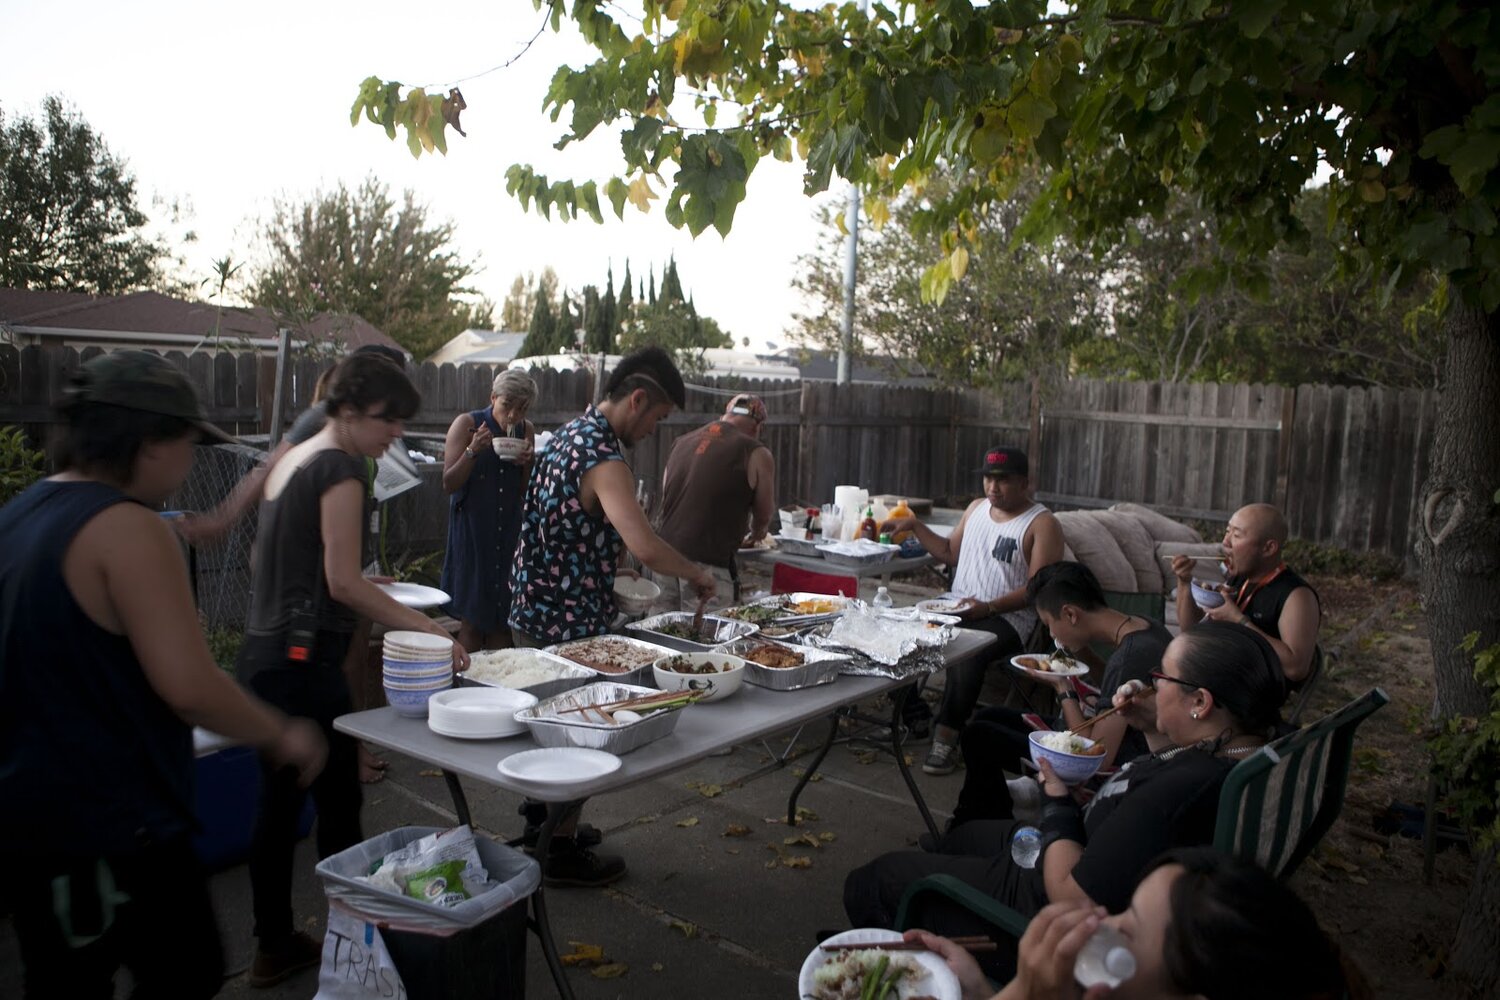  A crew of people are eating in a large backyard. 